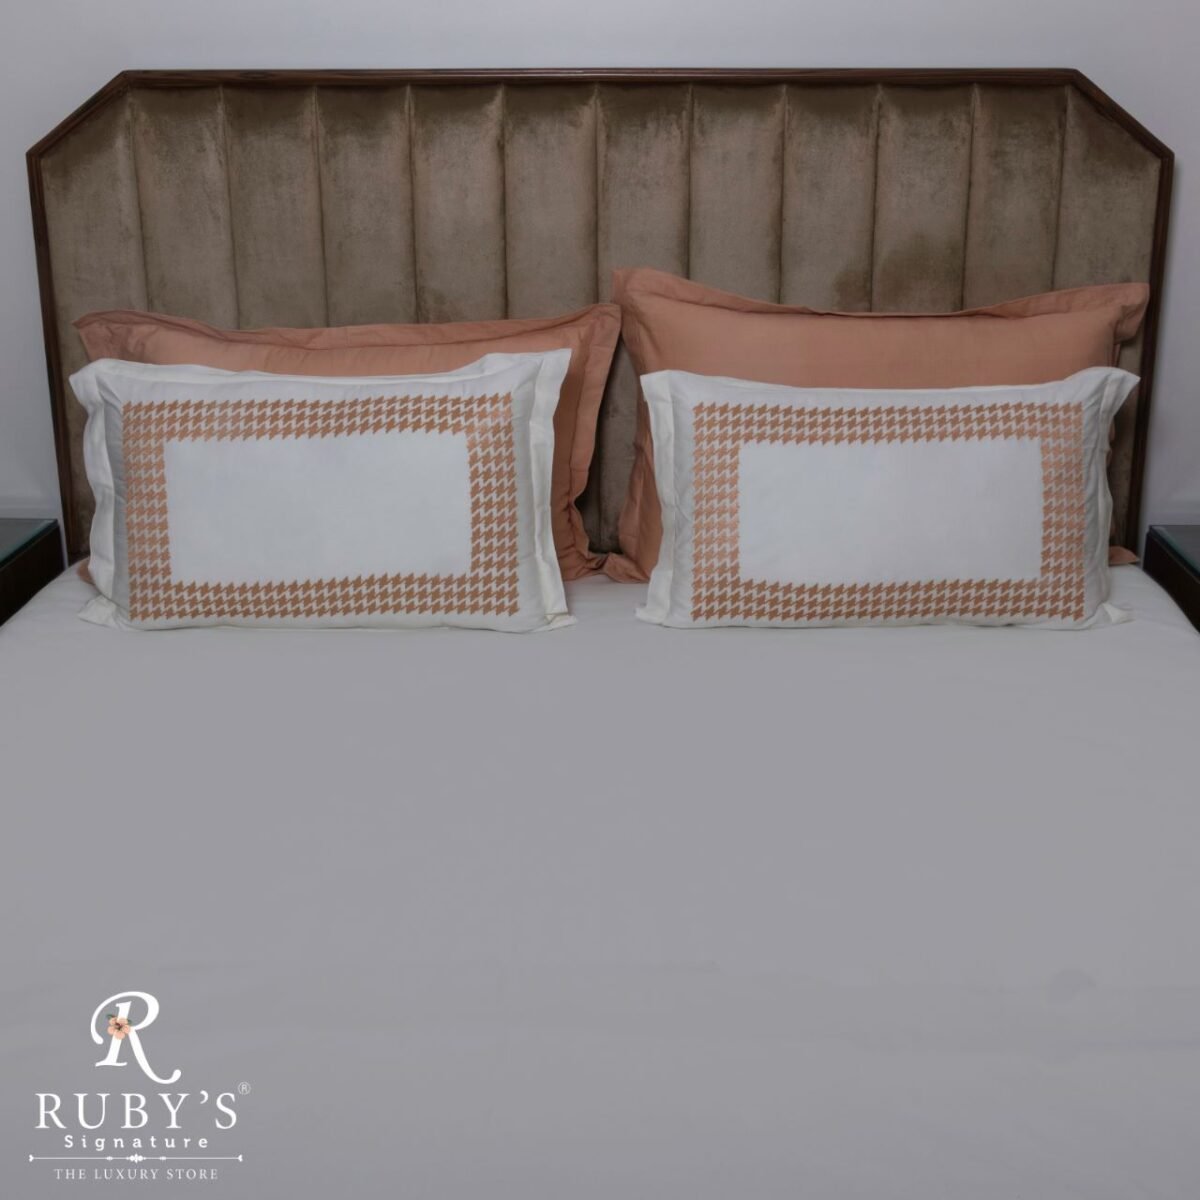 The Houndstooth Terracotta Bed sheet